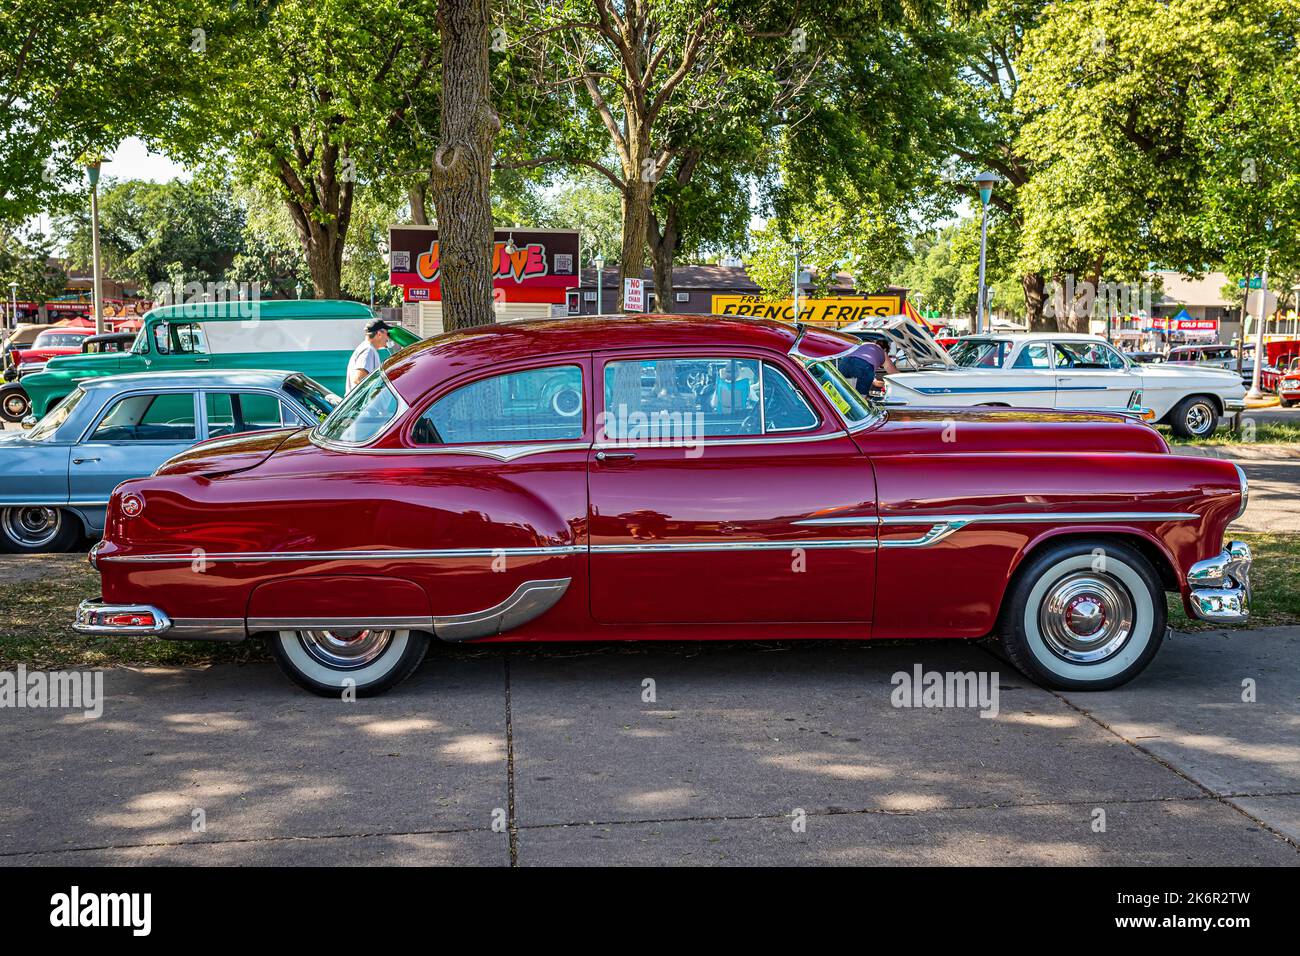 Falcon Heights, MN - June 19, 2022: High perspective side view of a 1953 Pontiac Chieftain 2 Door Sedan at a local car show. Stock Photo